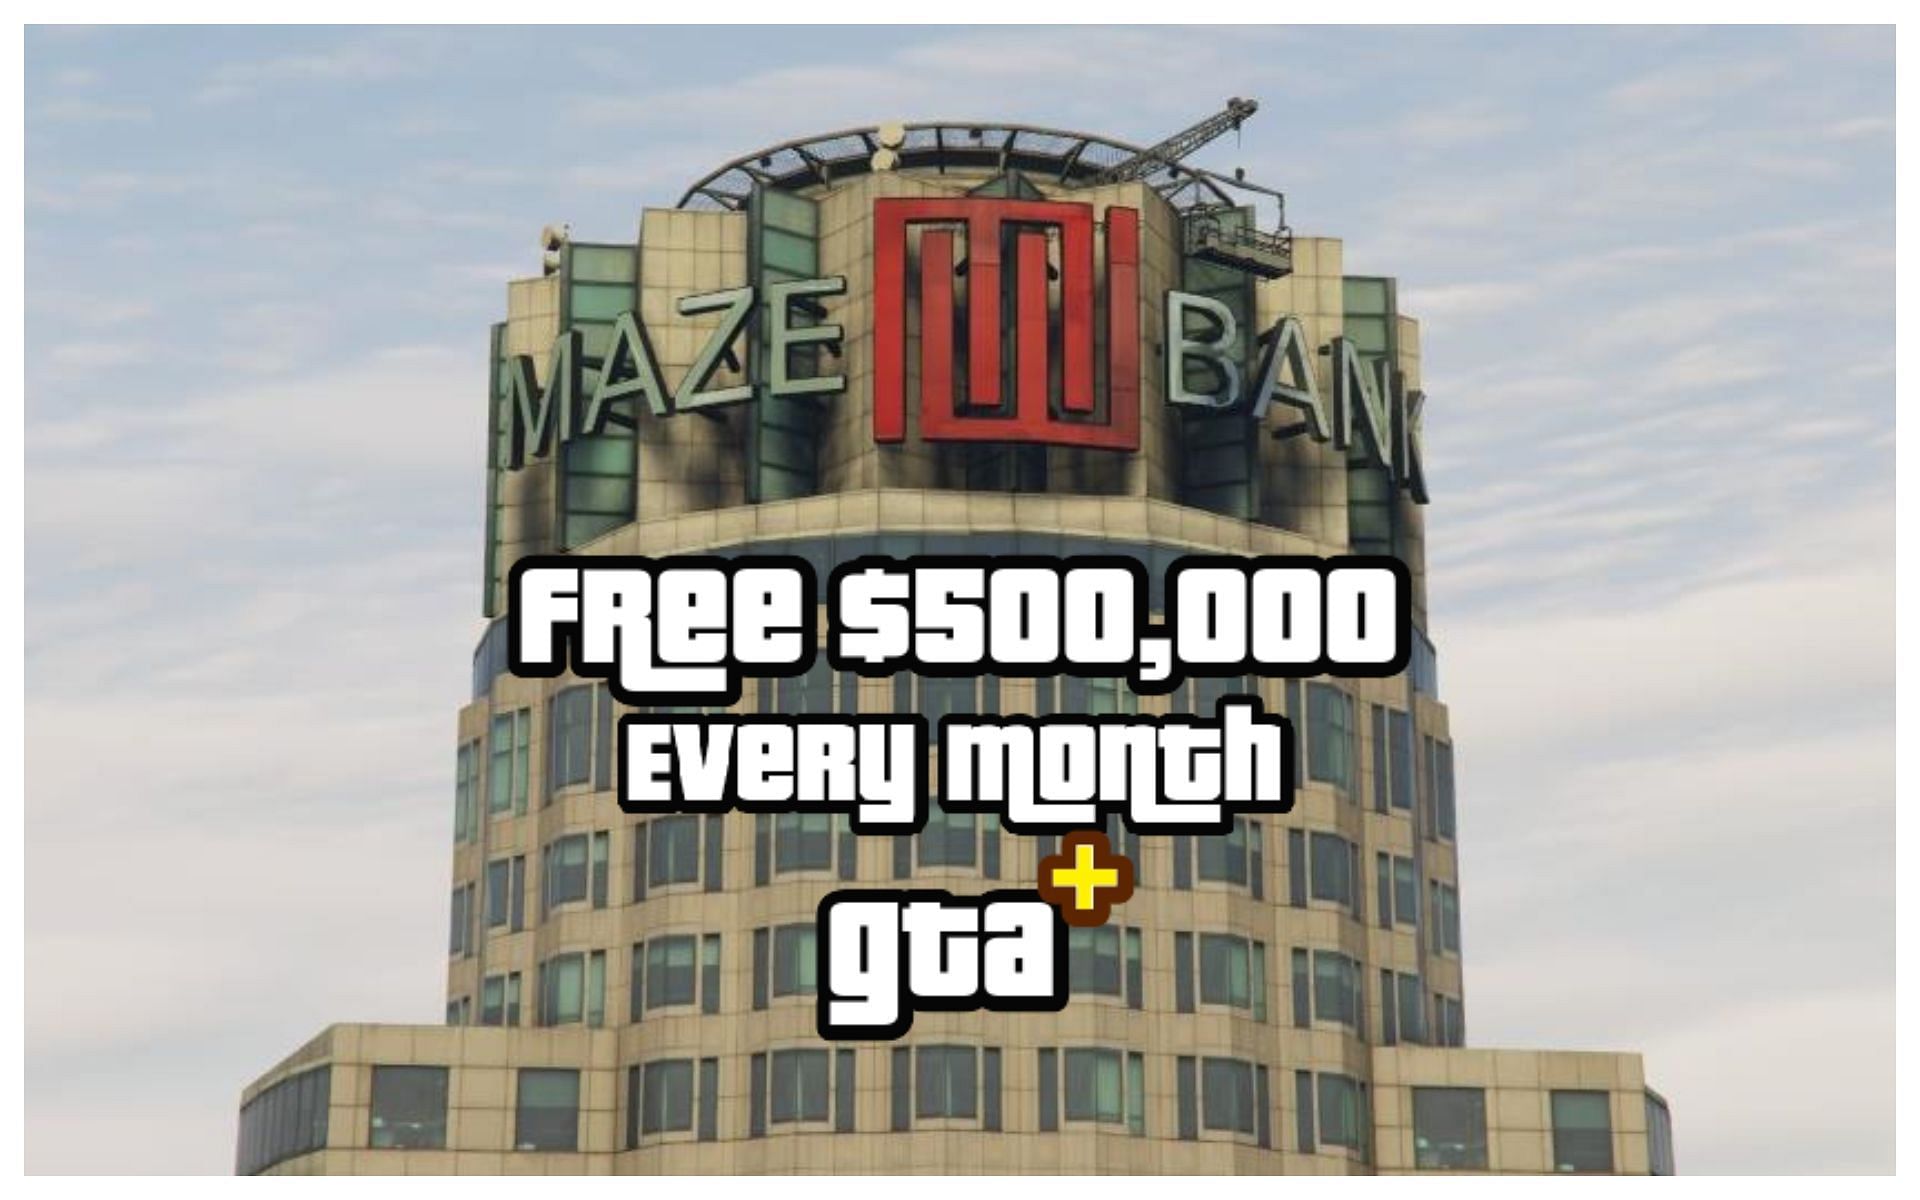 Half a million in your Maze Bank account every month (Image via Sportkseeda)